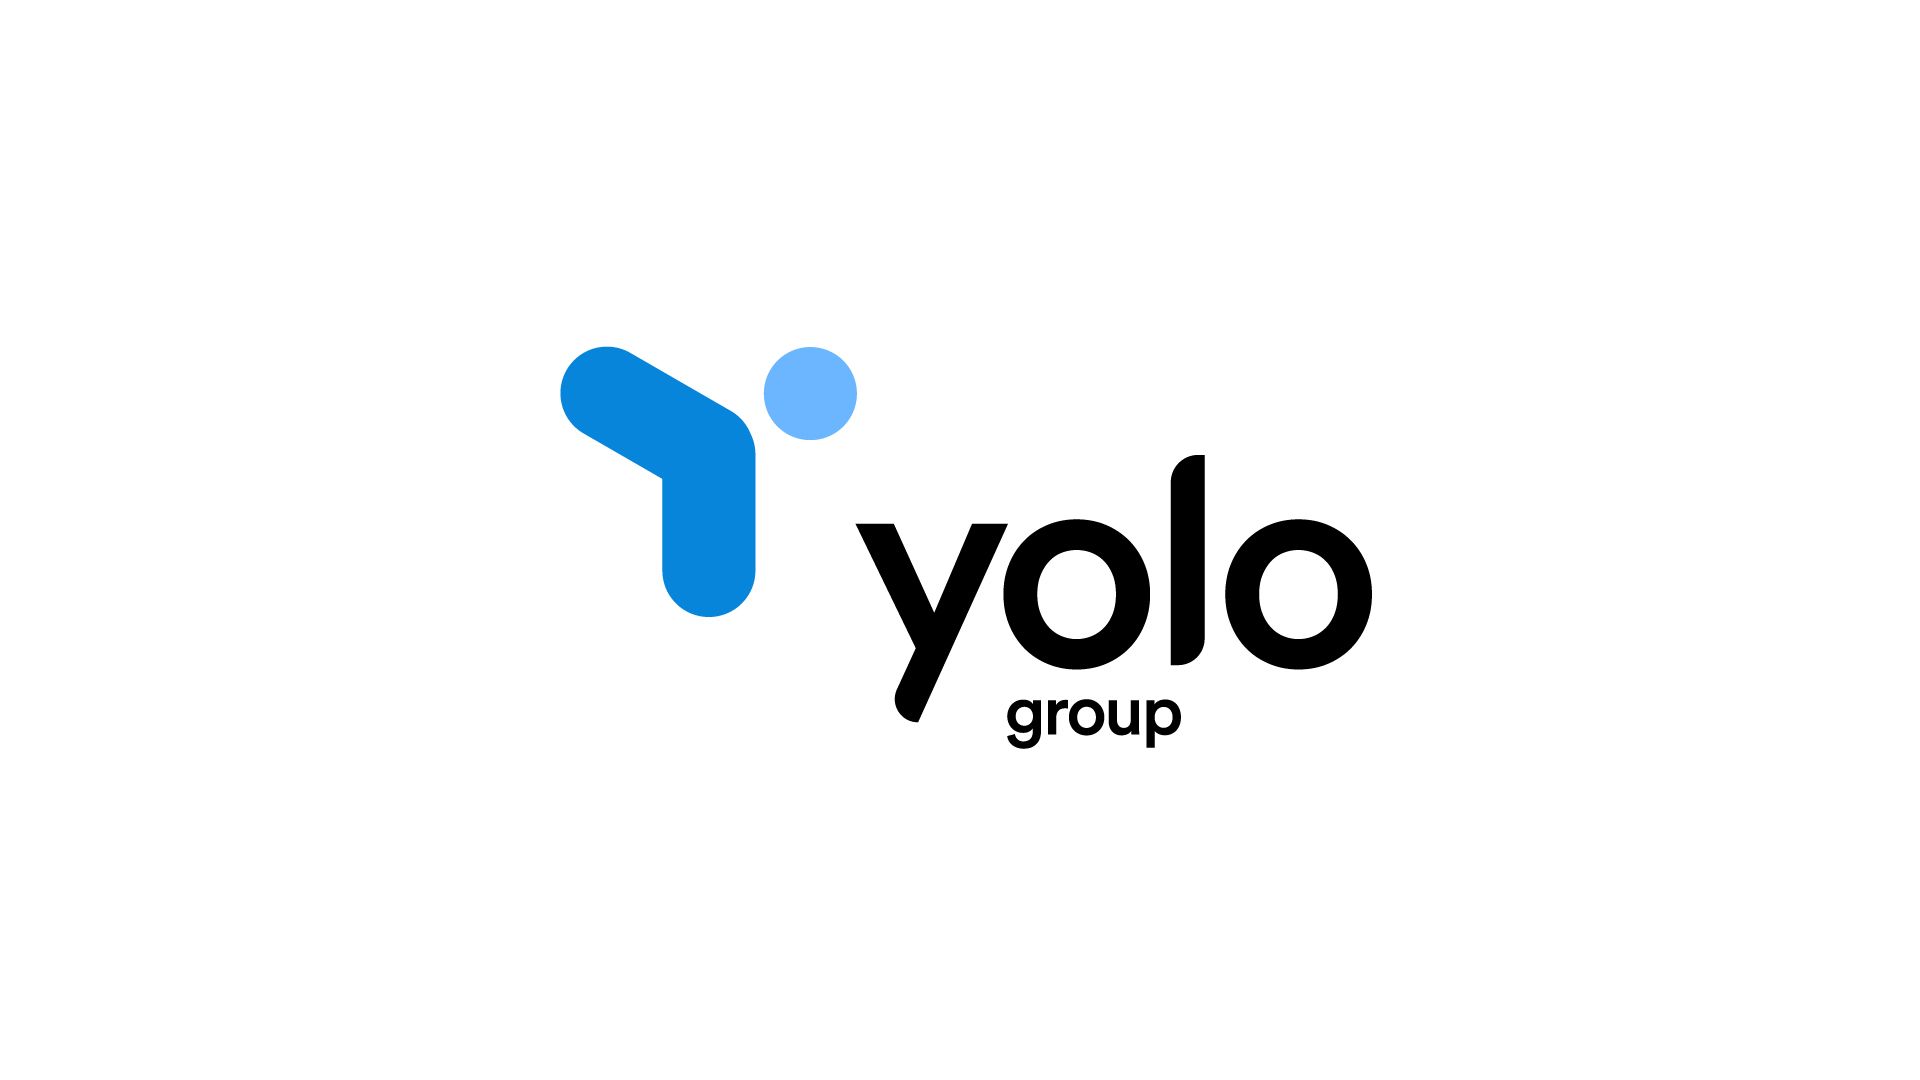 Coingaming Group is now Yolo Group